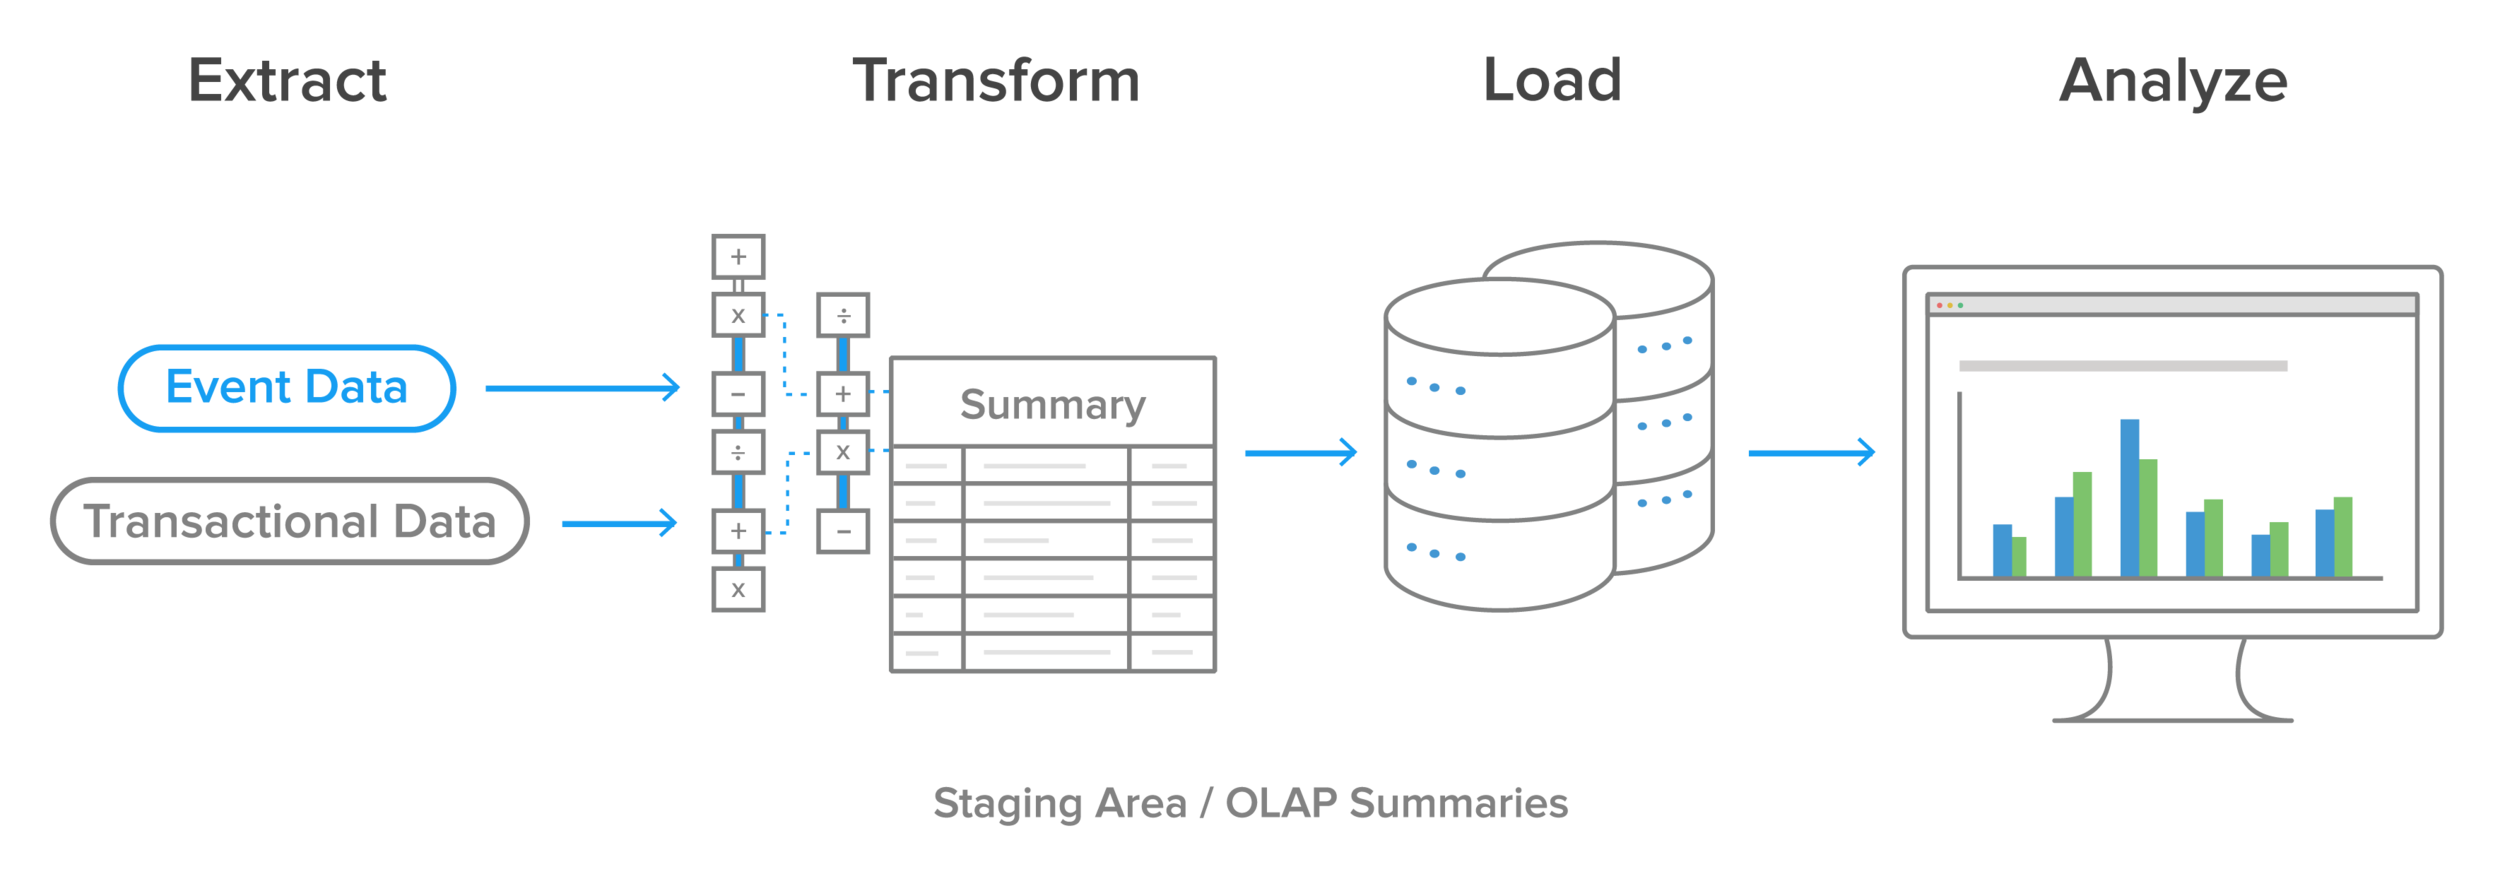 Illustration of the ETL process: extract, transform and load